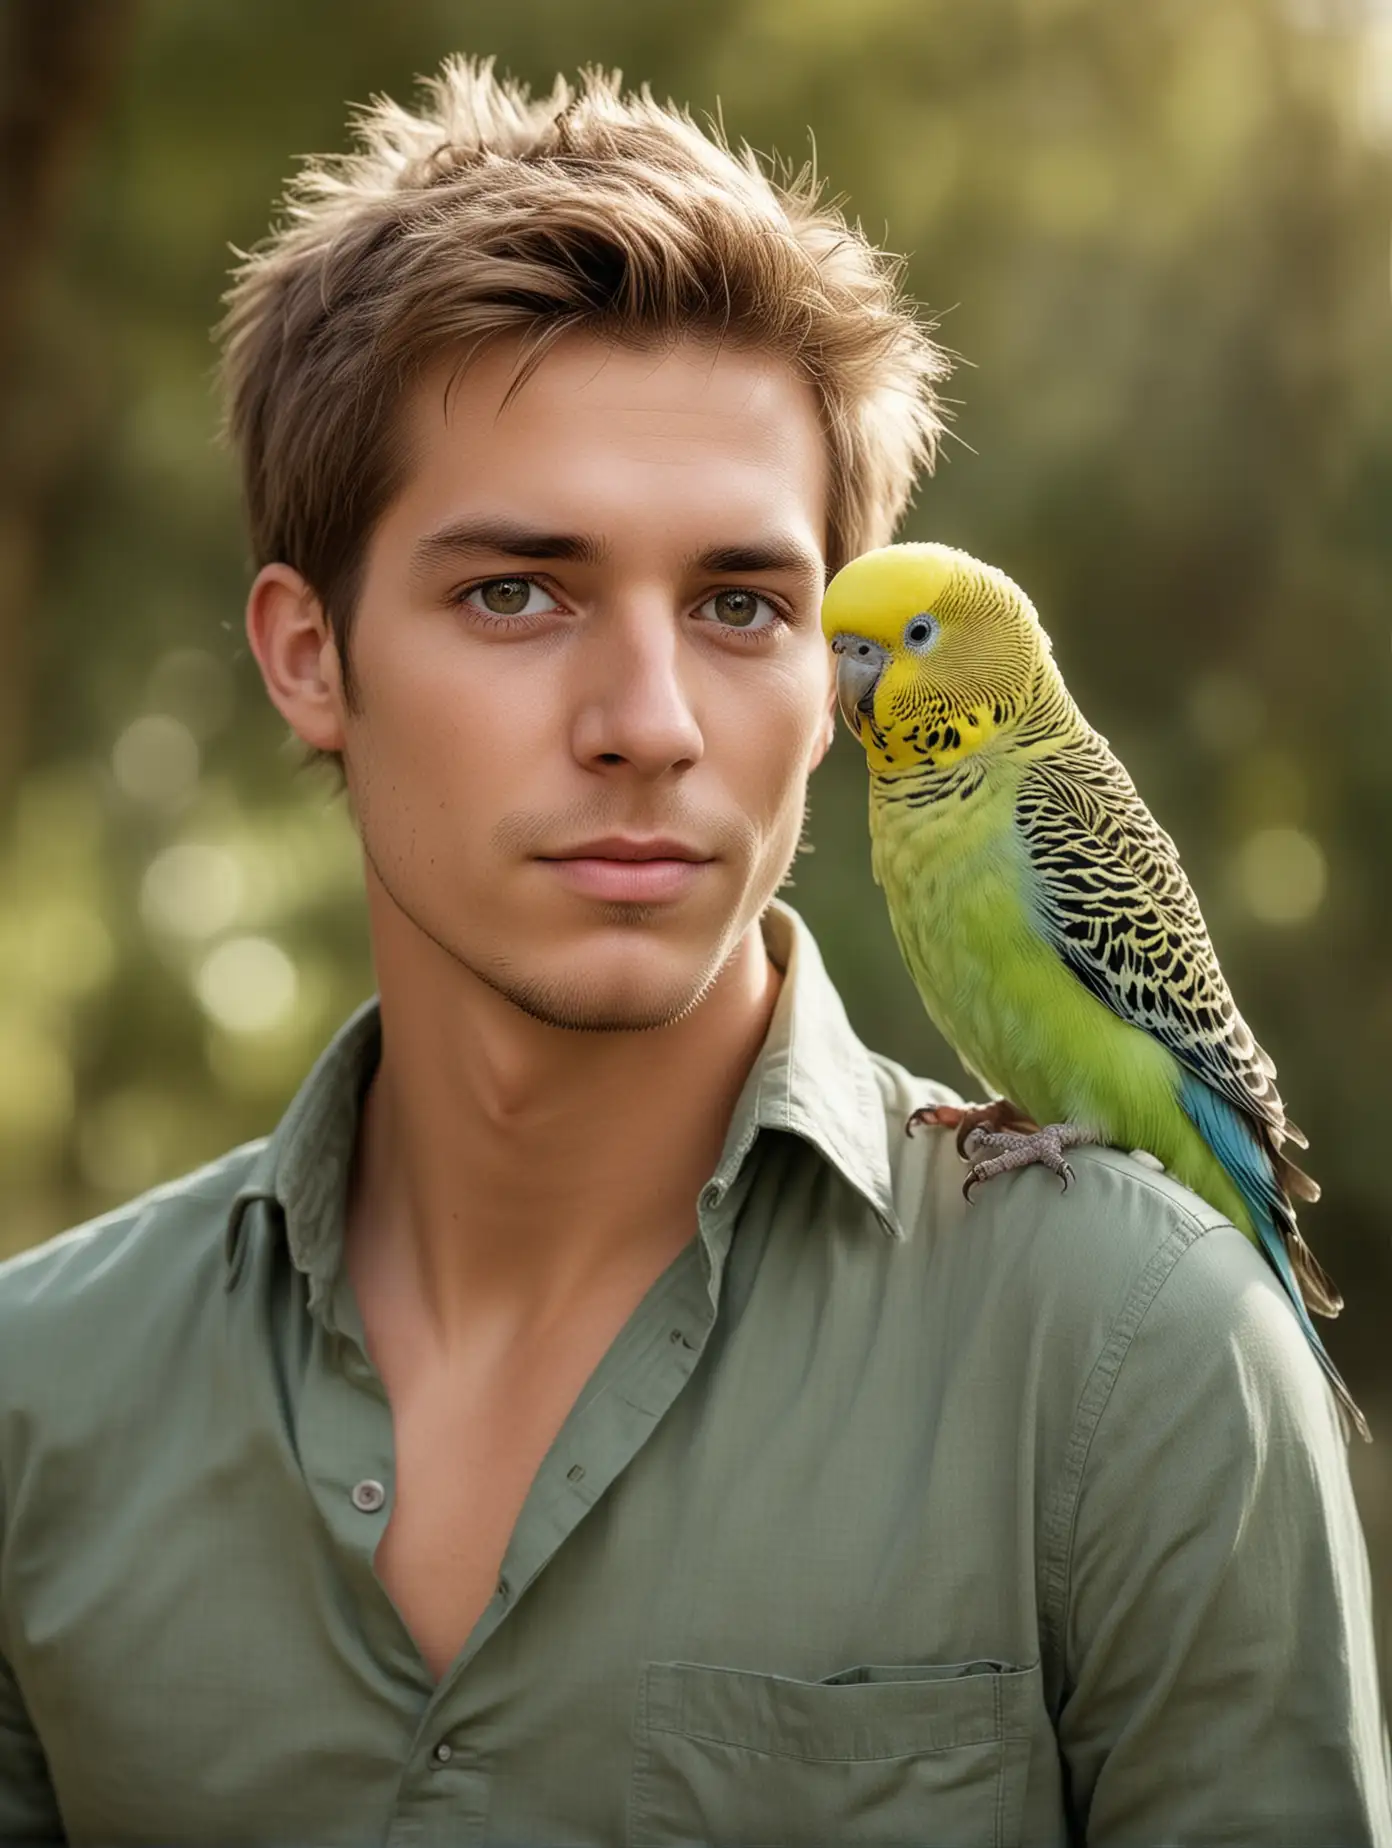 Outdoor Portrait of a Handsome Young Man with a Budgerigar